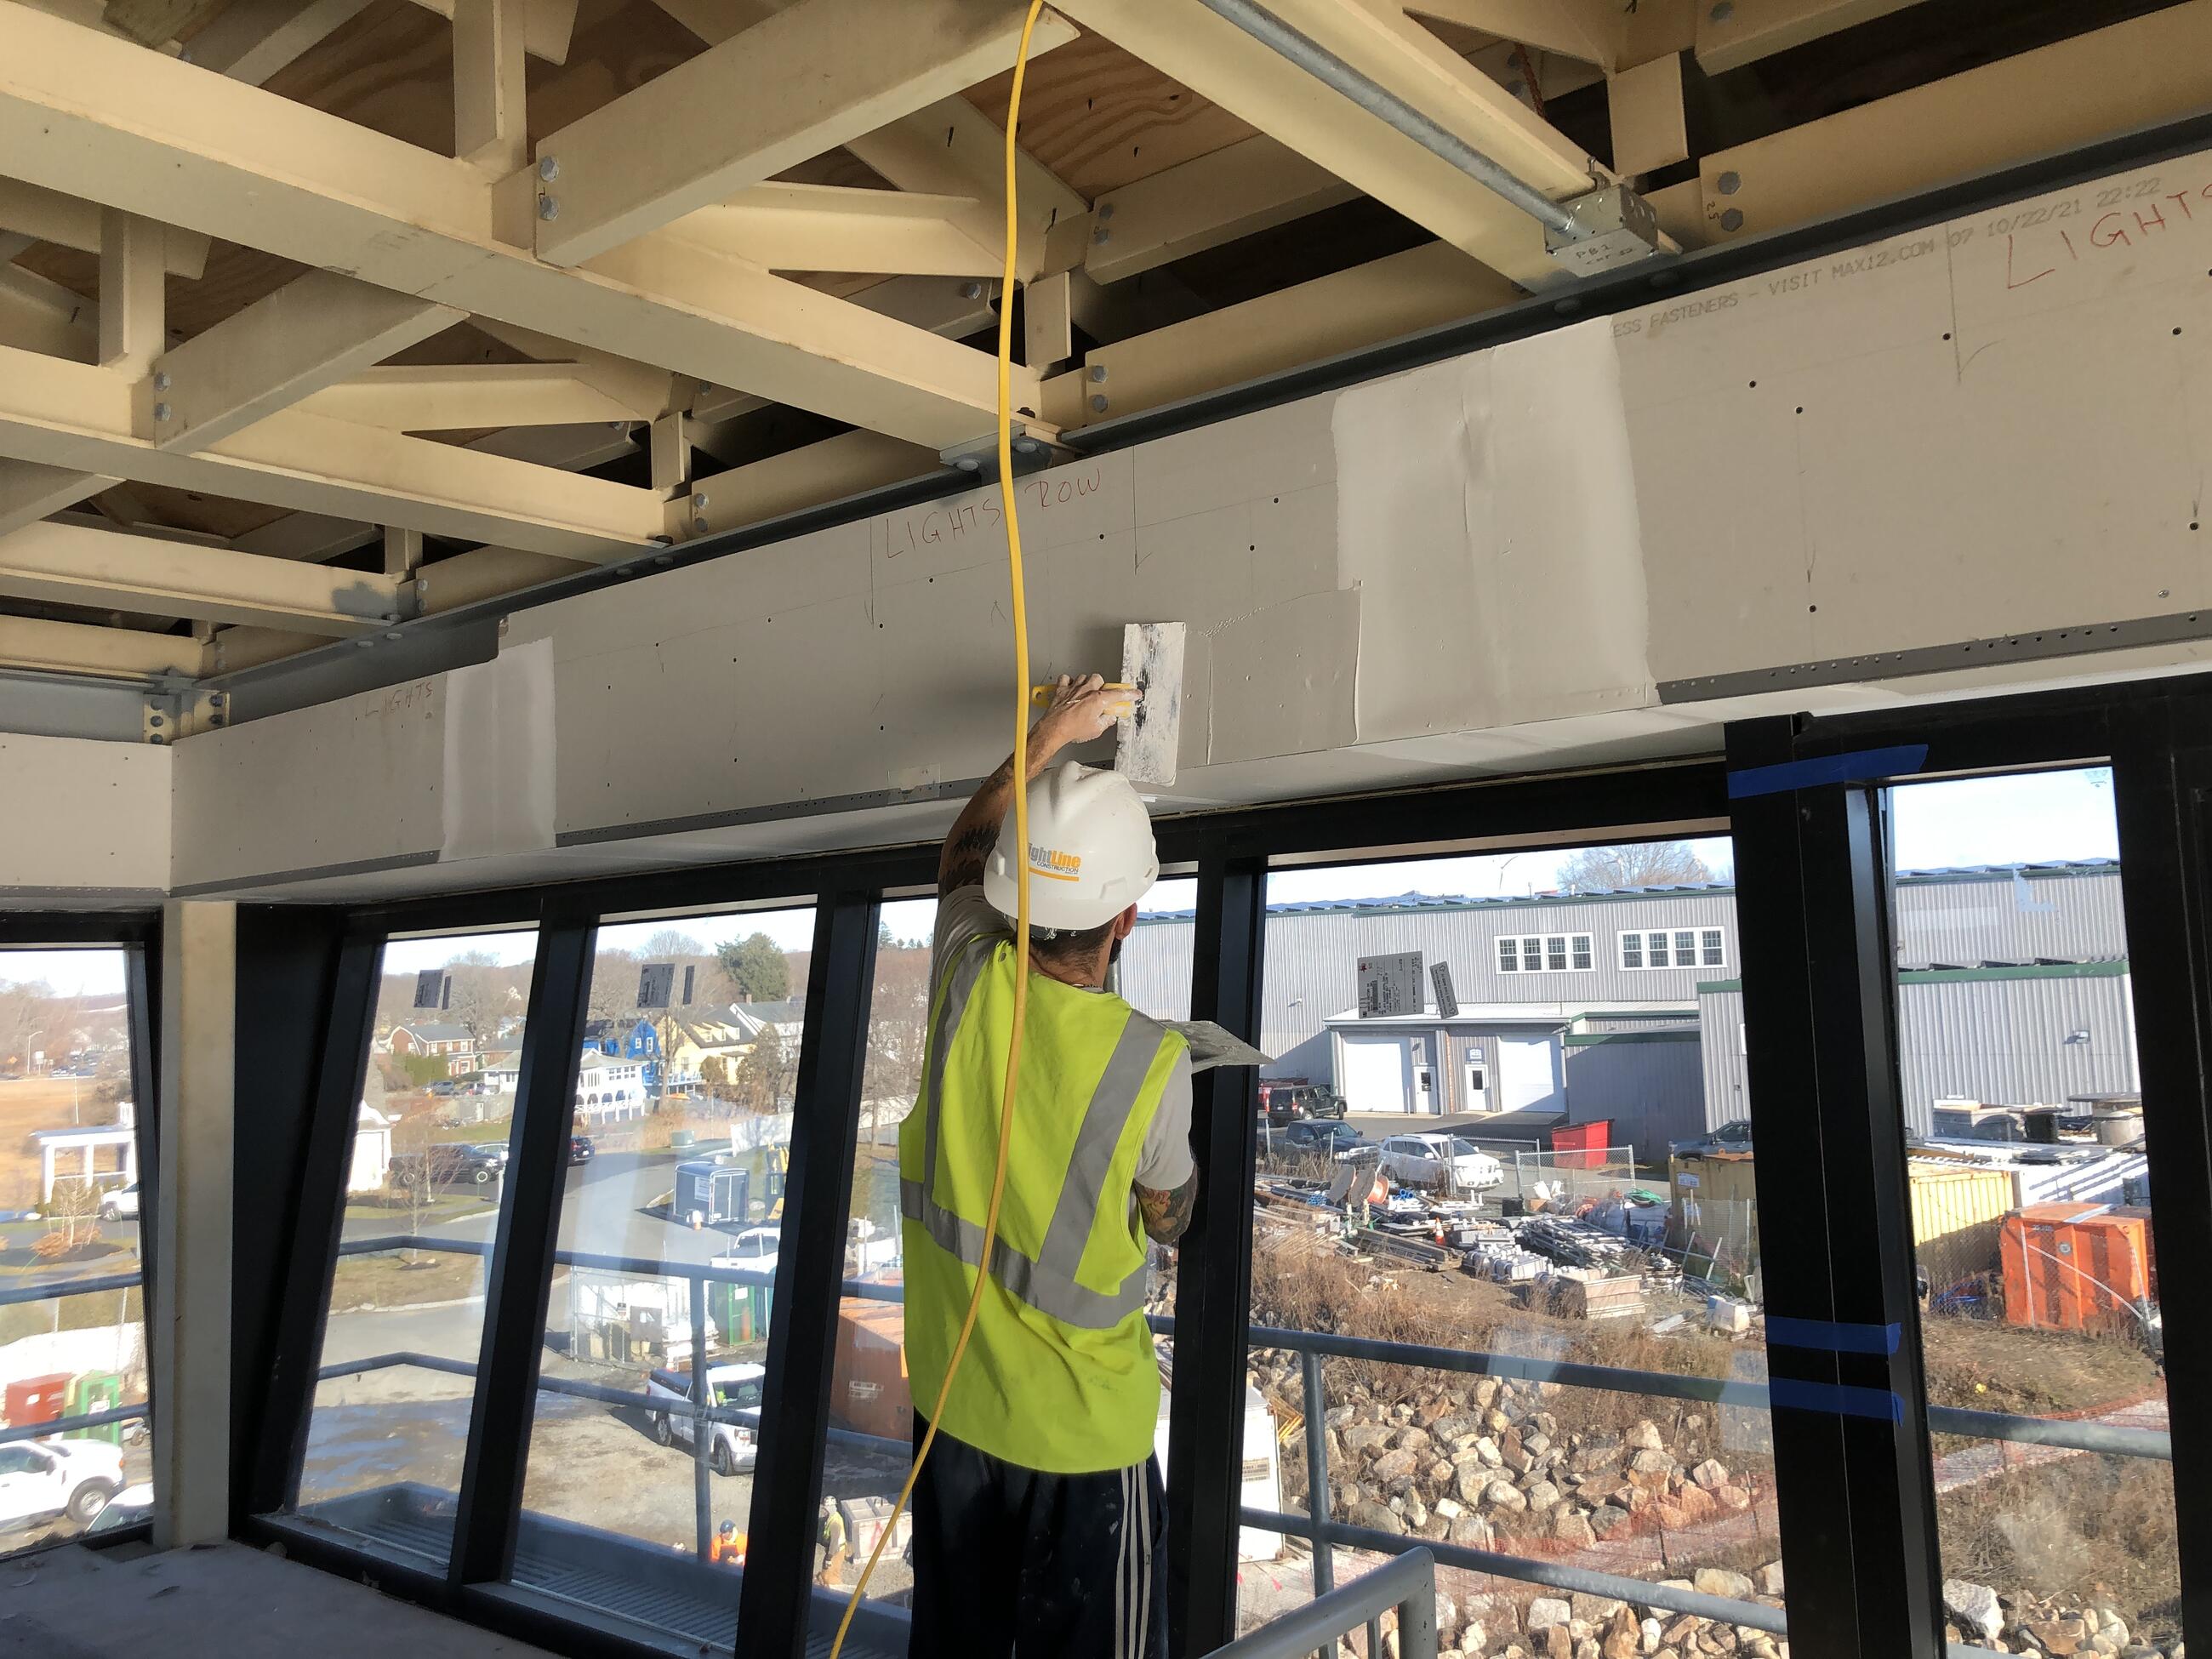 A worker in a yellow vest and hardhat smooths plaster over the joins in a span of drywall above windows in the control tower. The windows overlook the construction site below. The wooden beams below the ceiling of the control tower can be seen above the worker's head. 